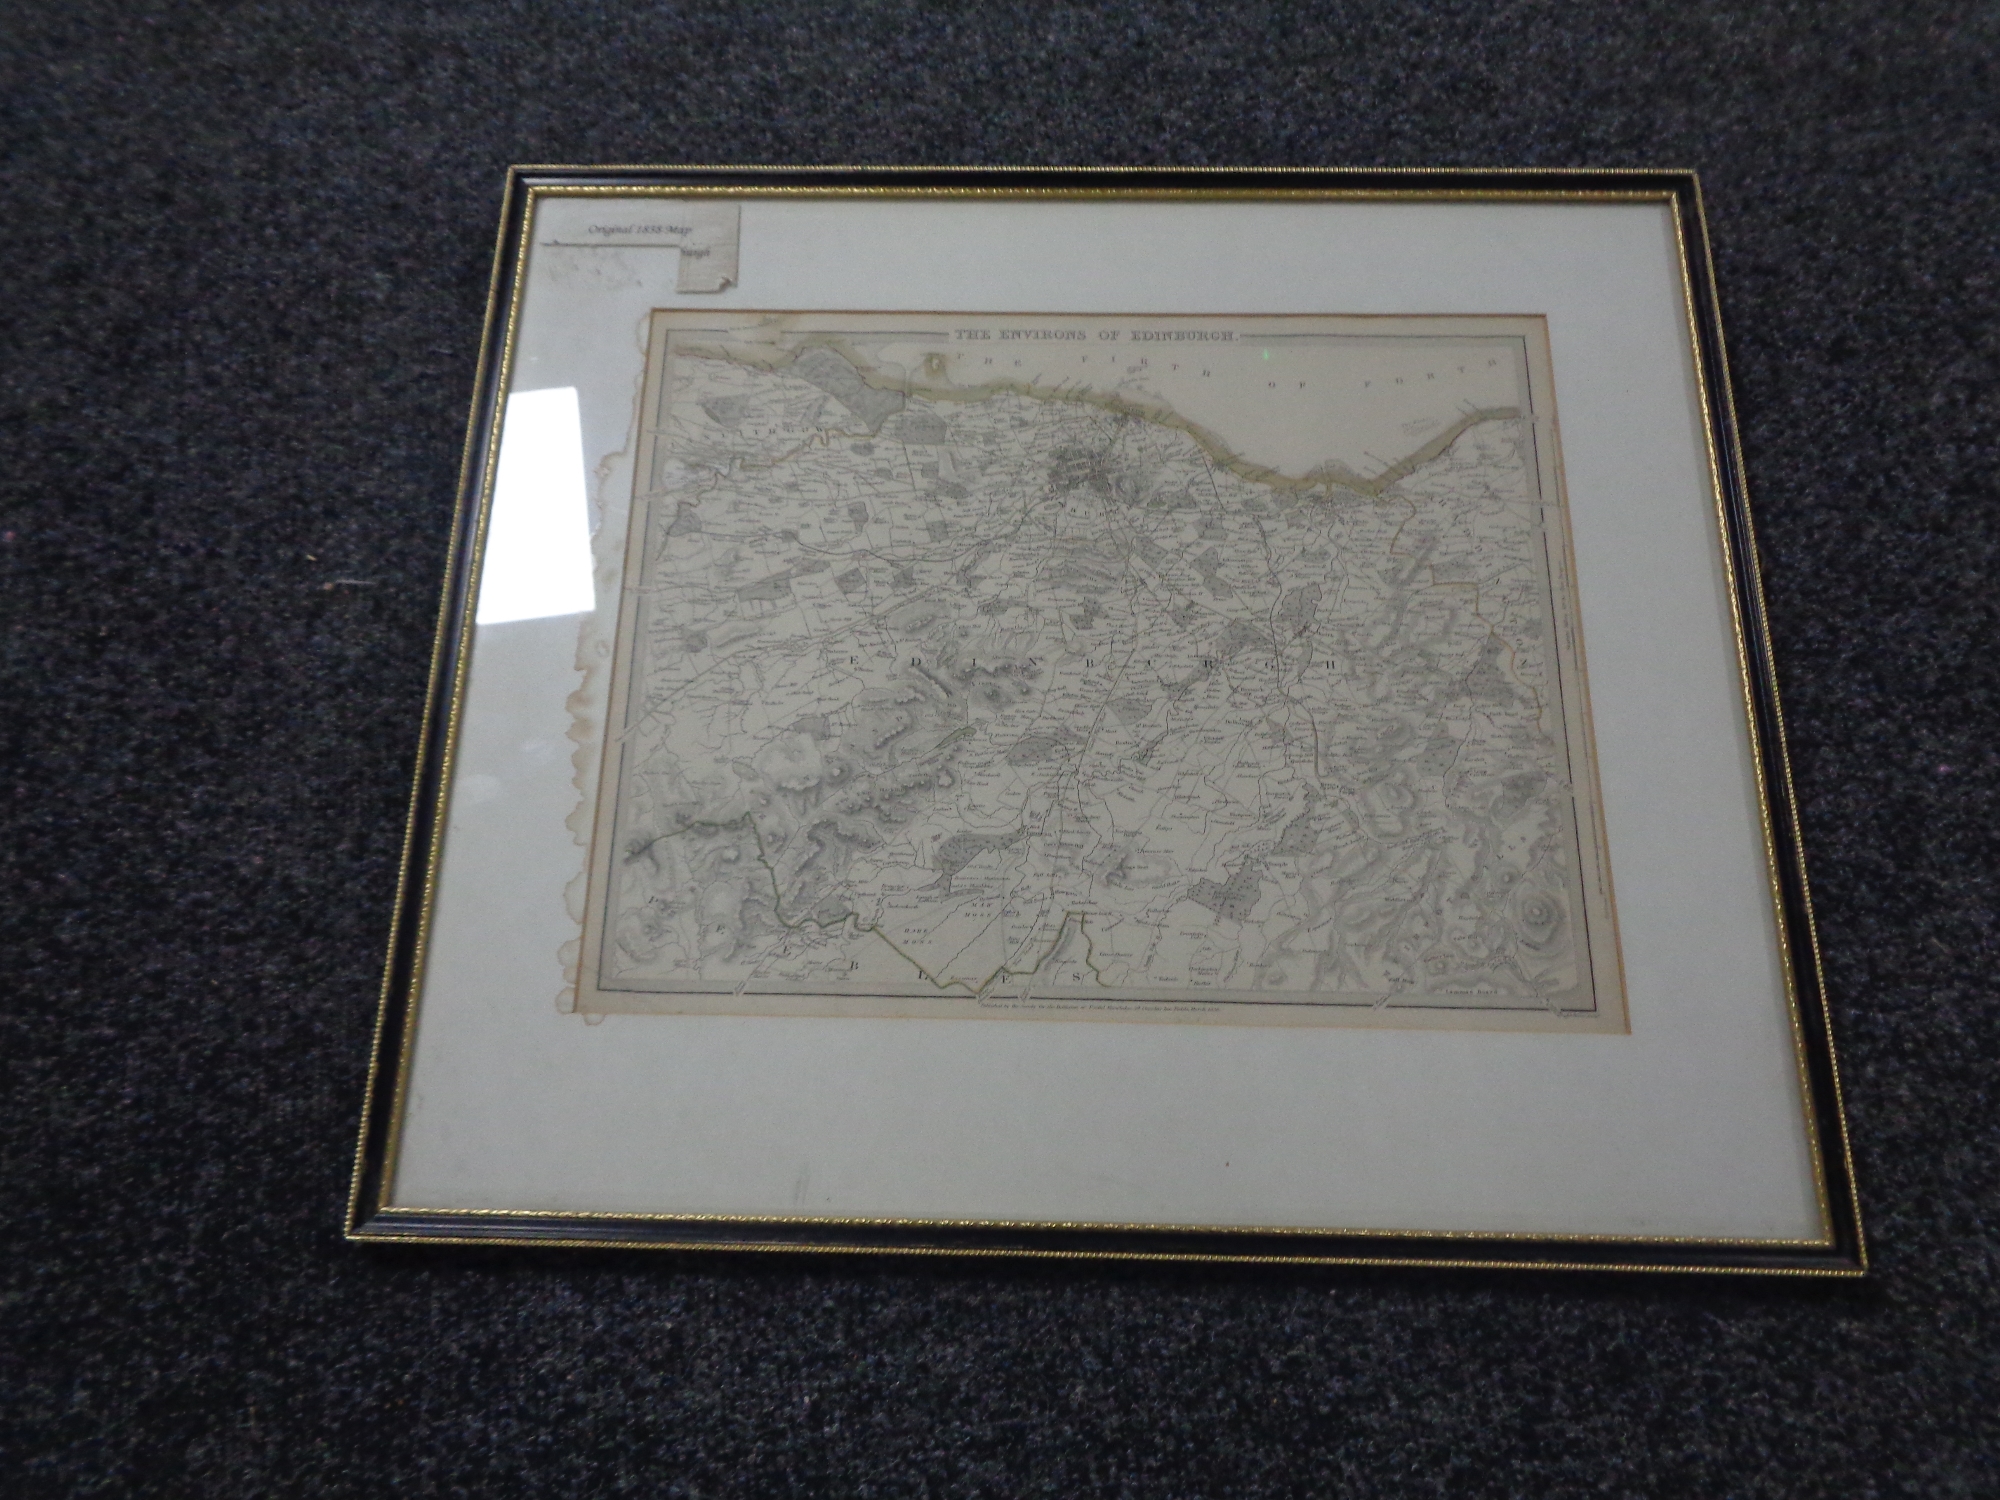 A 19th century hand coloured map, The Environs of Edinburgh, published 1832, in Hogarth frame.